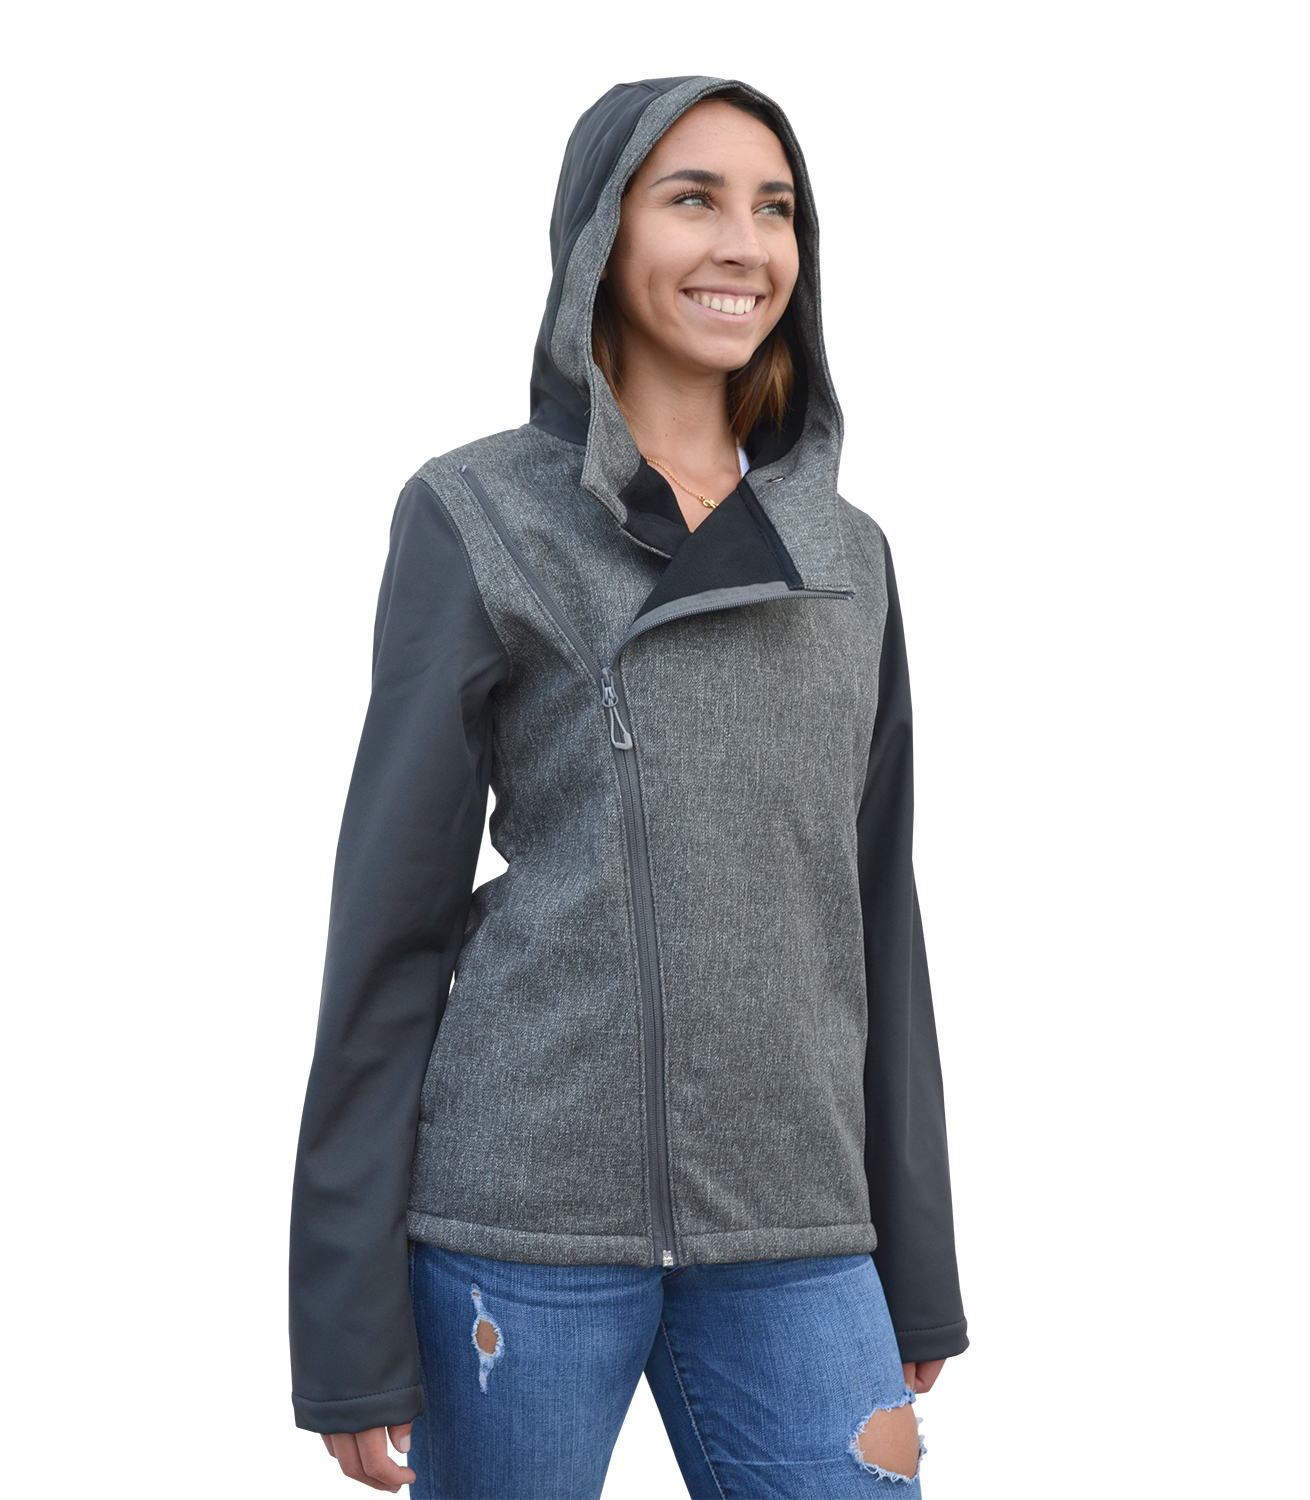 Renegade-club-womens diagonal-zip-woven-outdoor-soft-shell-jacket- blanks for embroidery wholesale